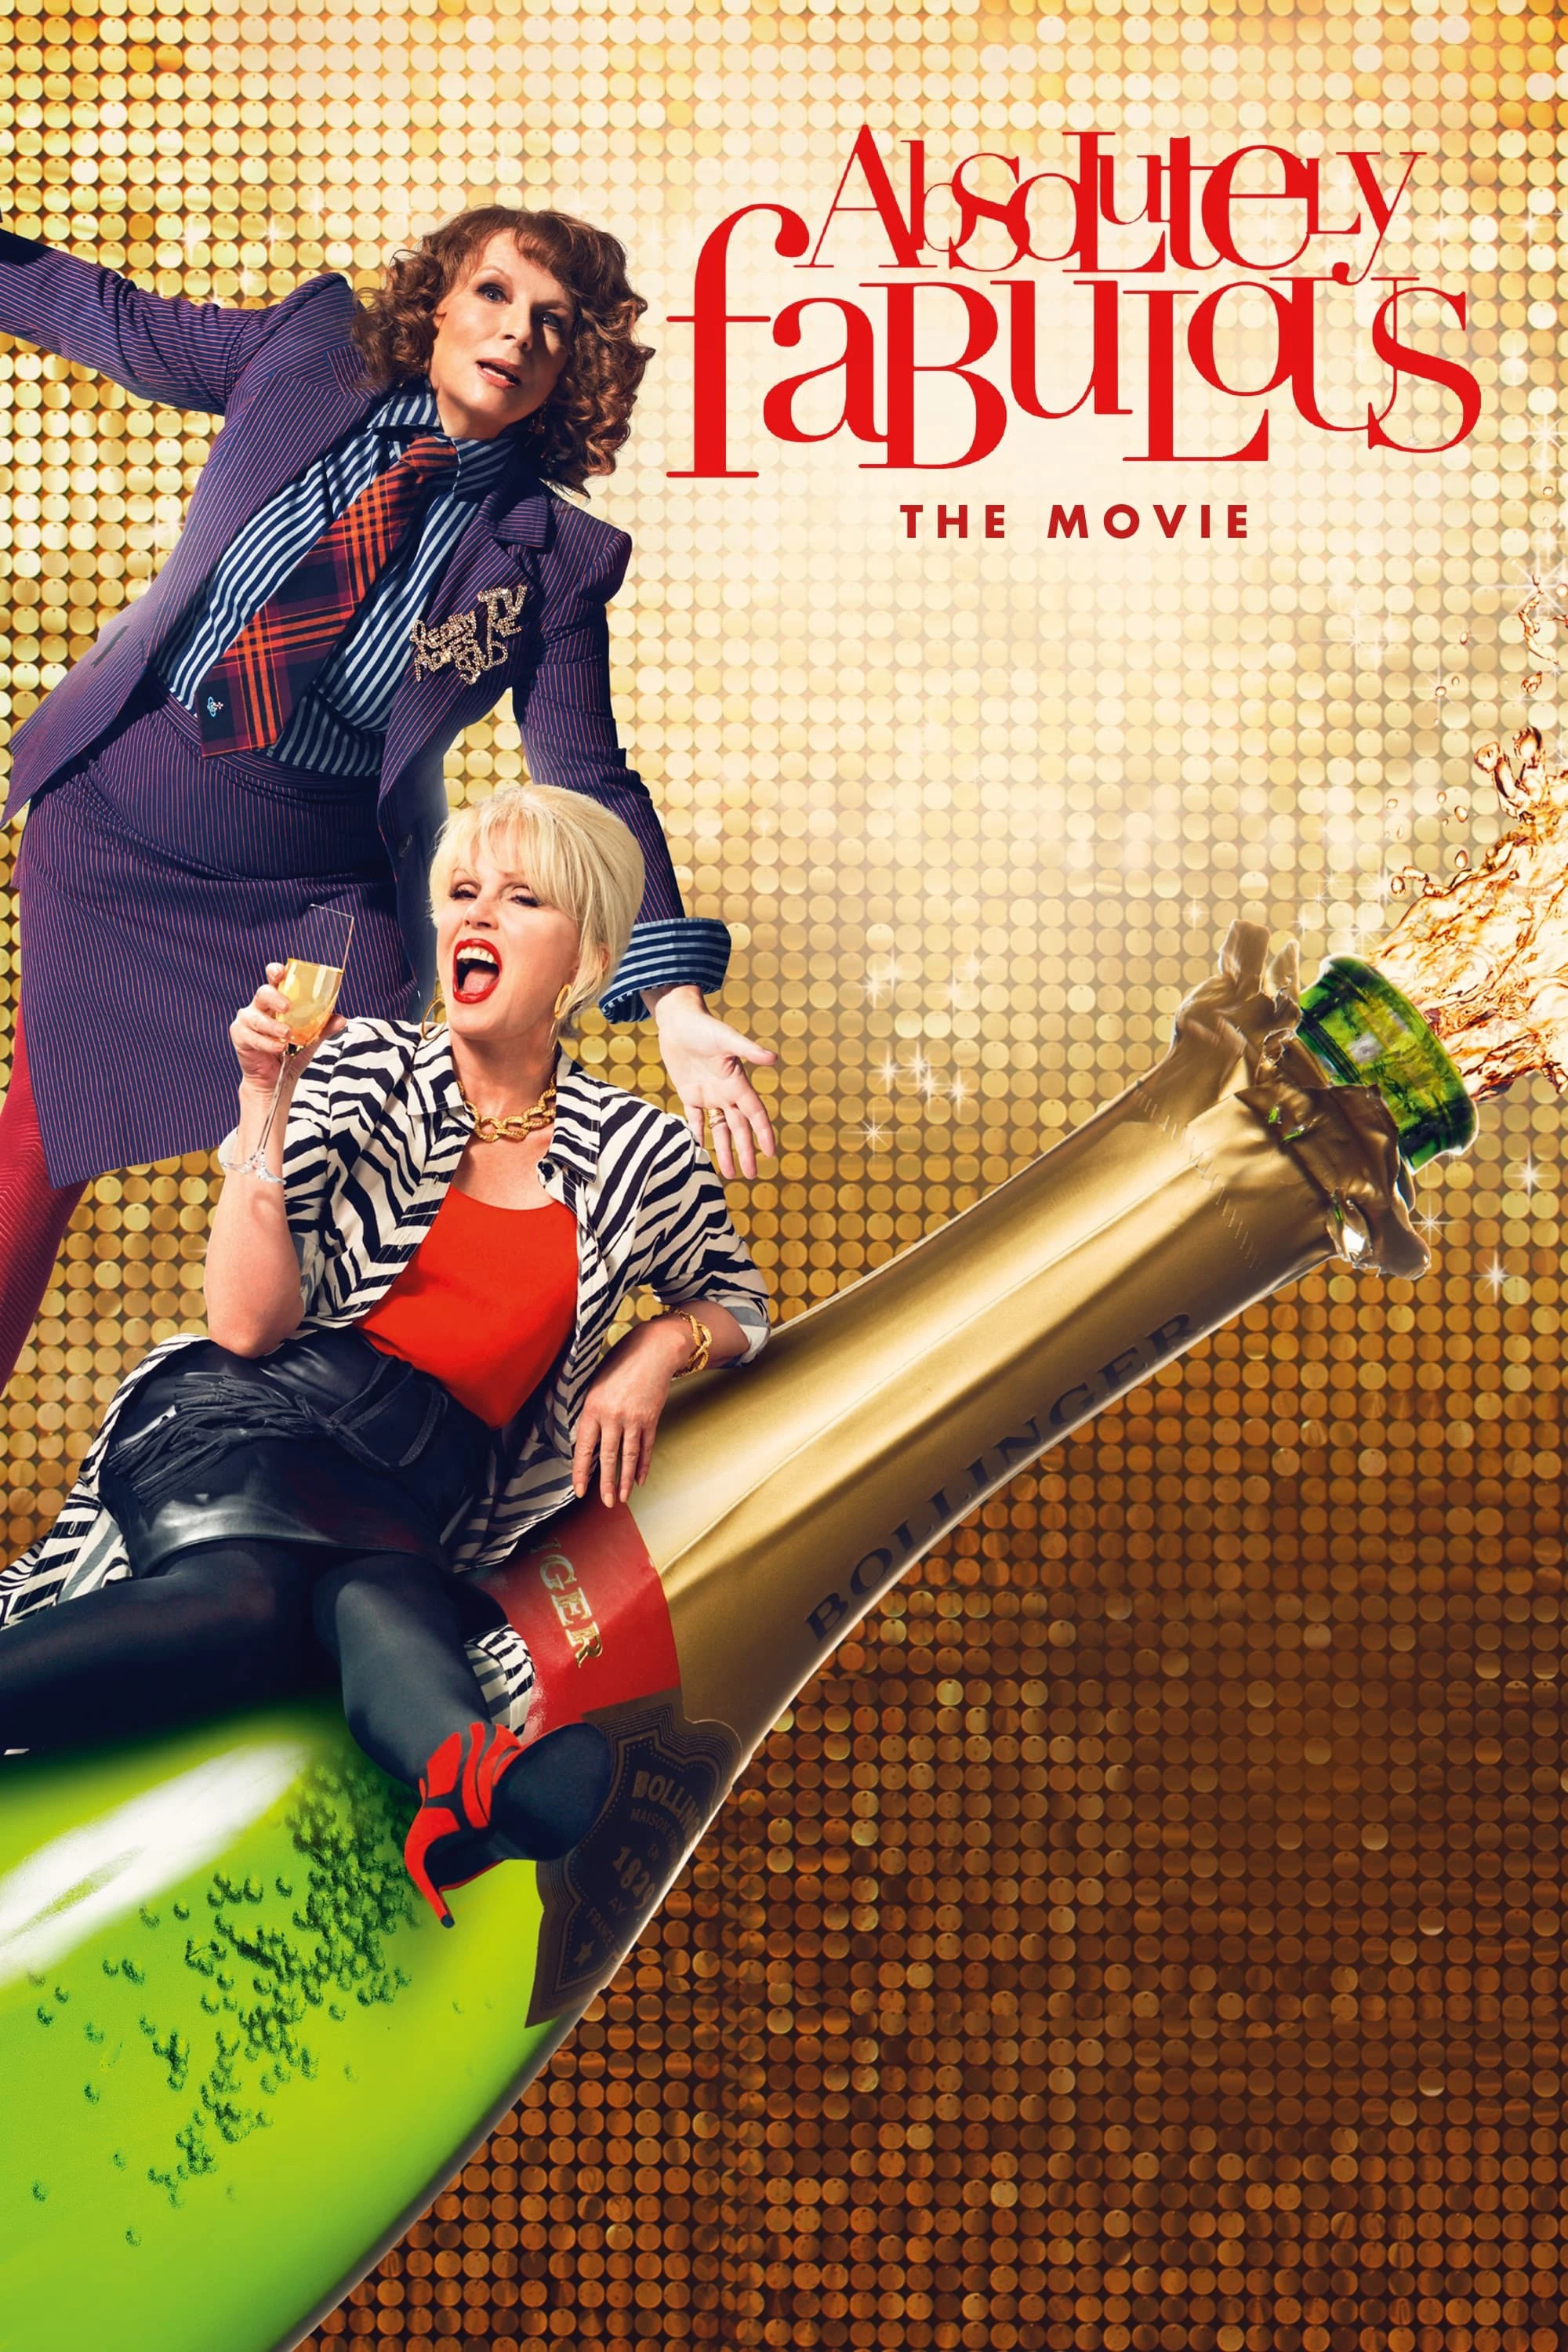 Tột Cùng Sang Chảnh | Absolutely Fabulous: The Movie (2016)